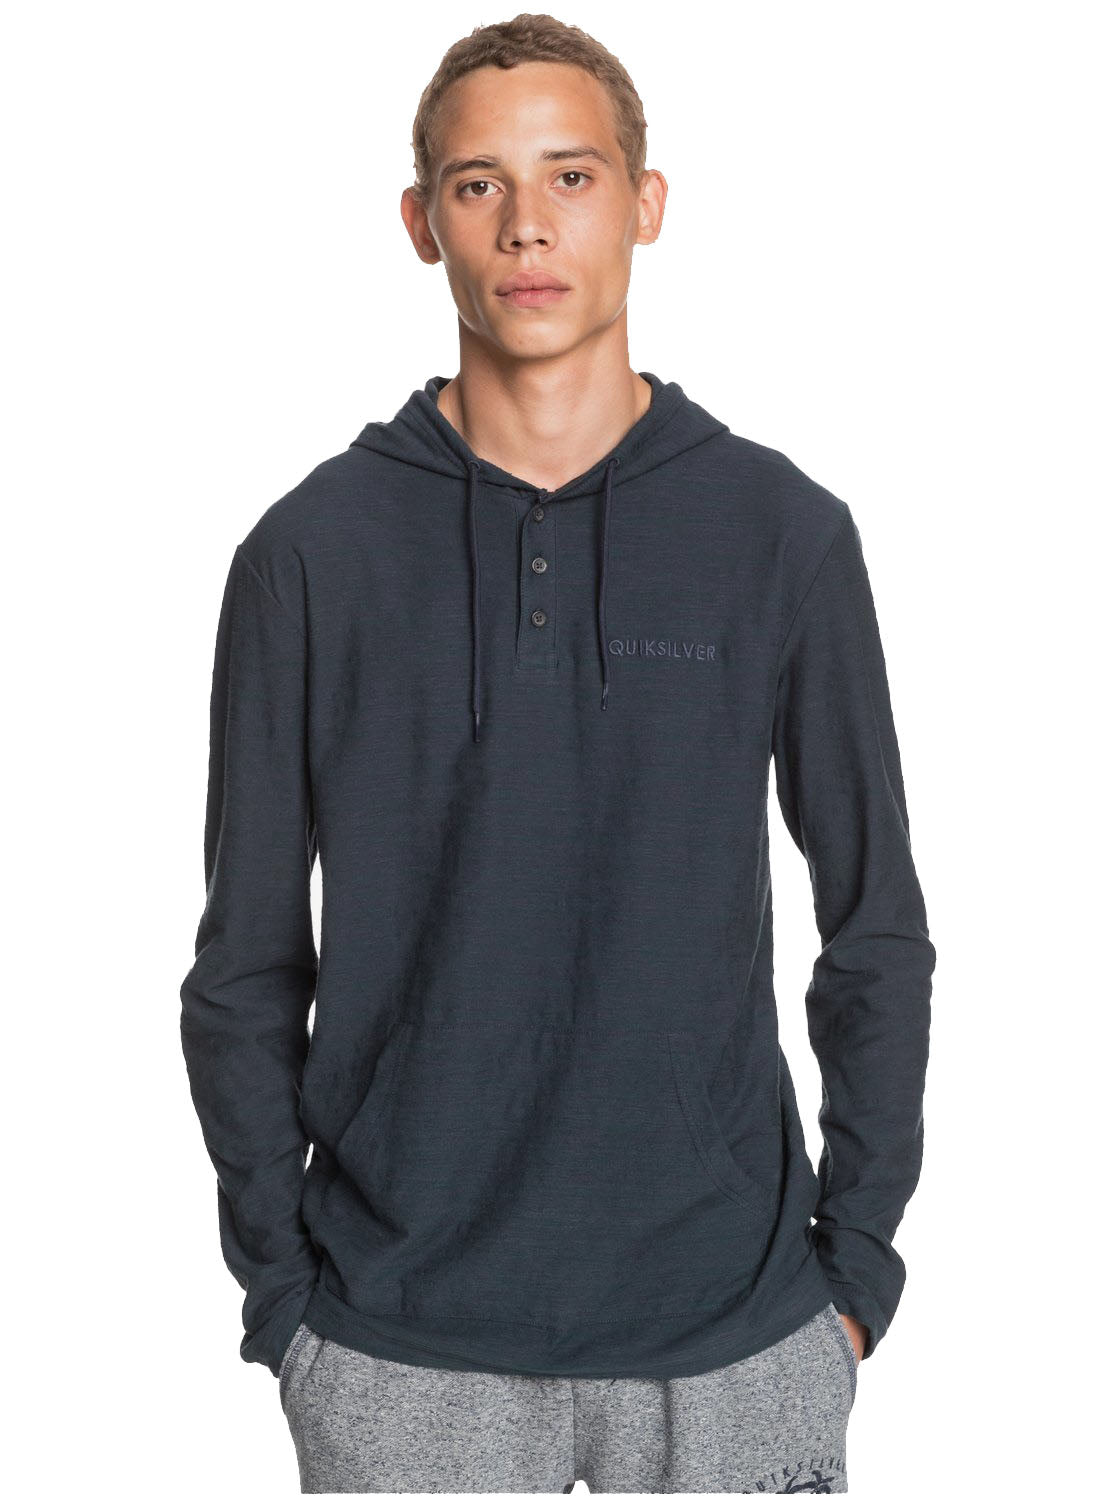 Quiksilver Kentin Long Sleeve Hooded Top BYP3 S